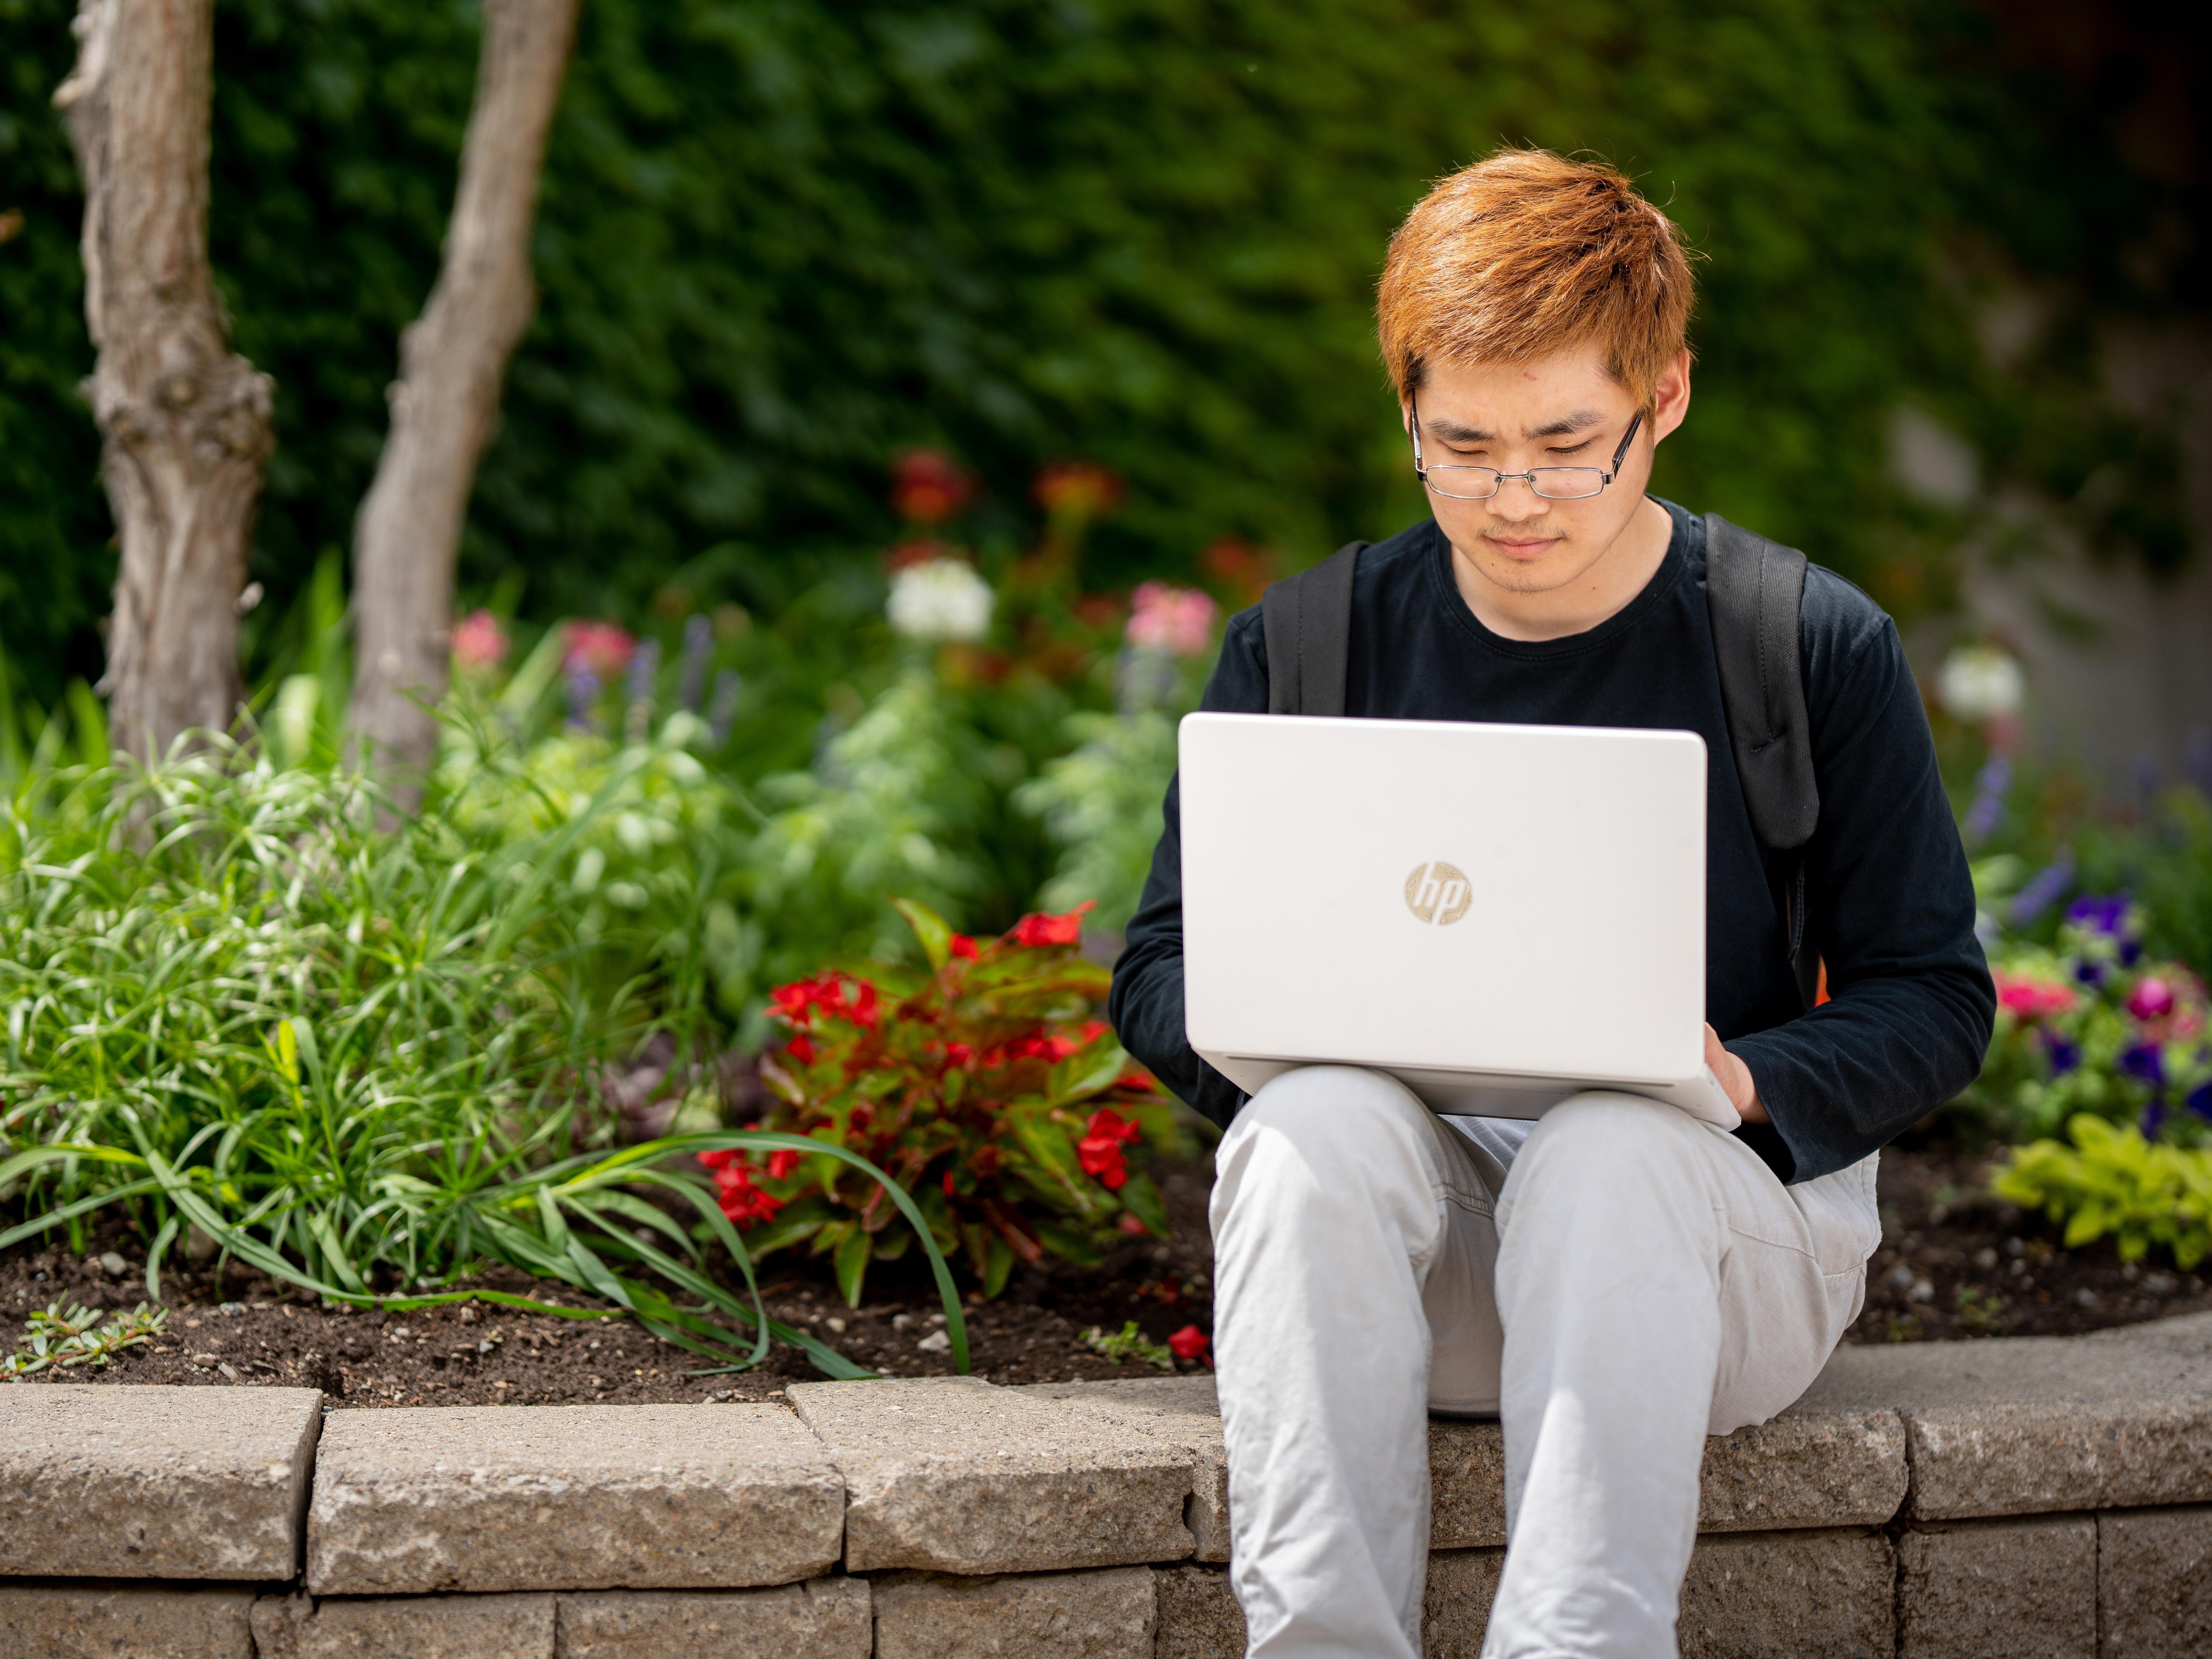 Student sitting with laptop outdoors